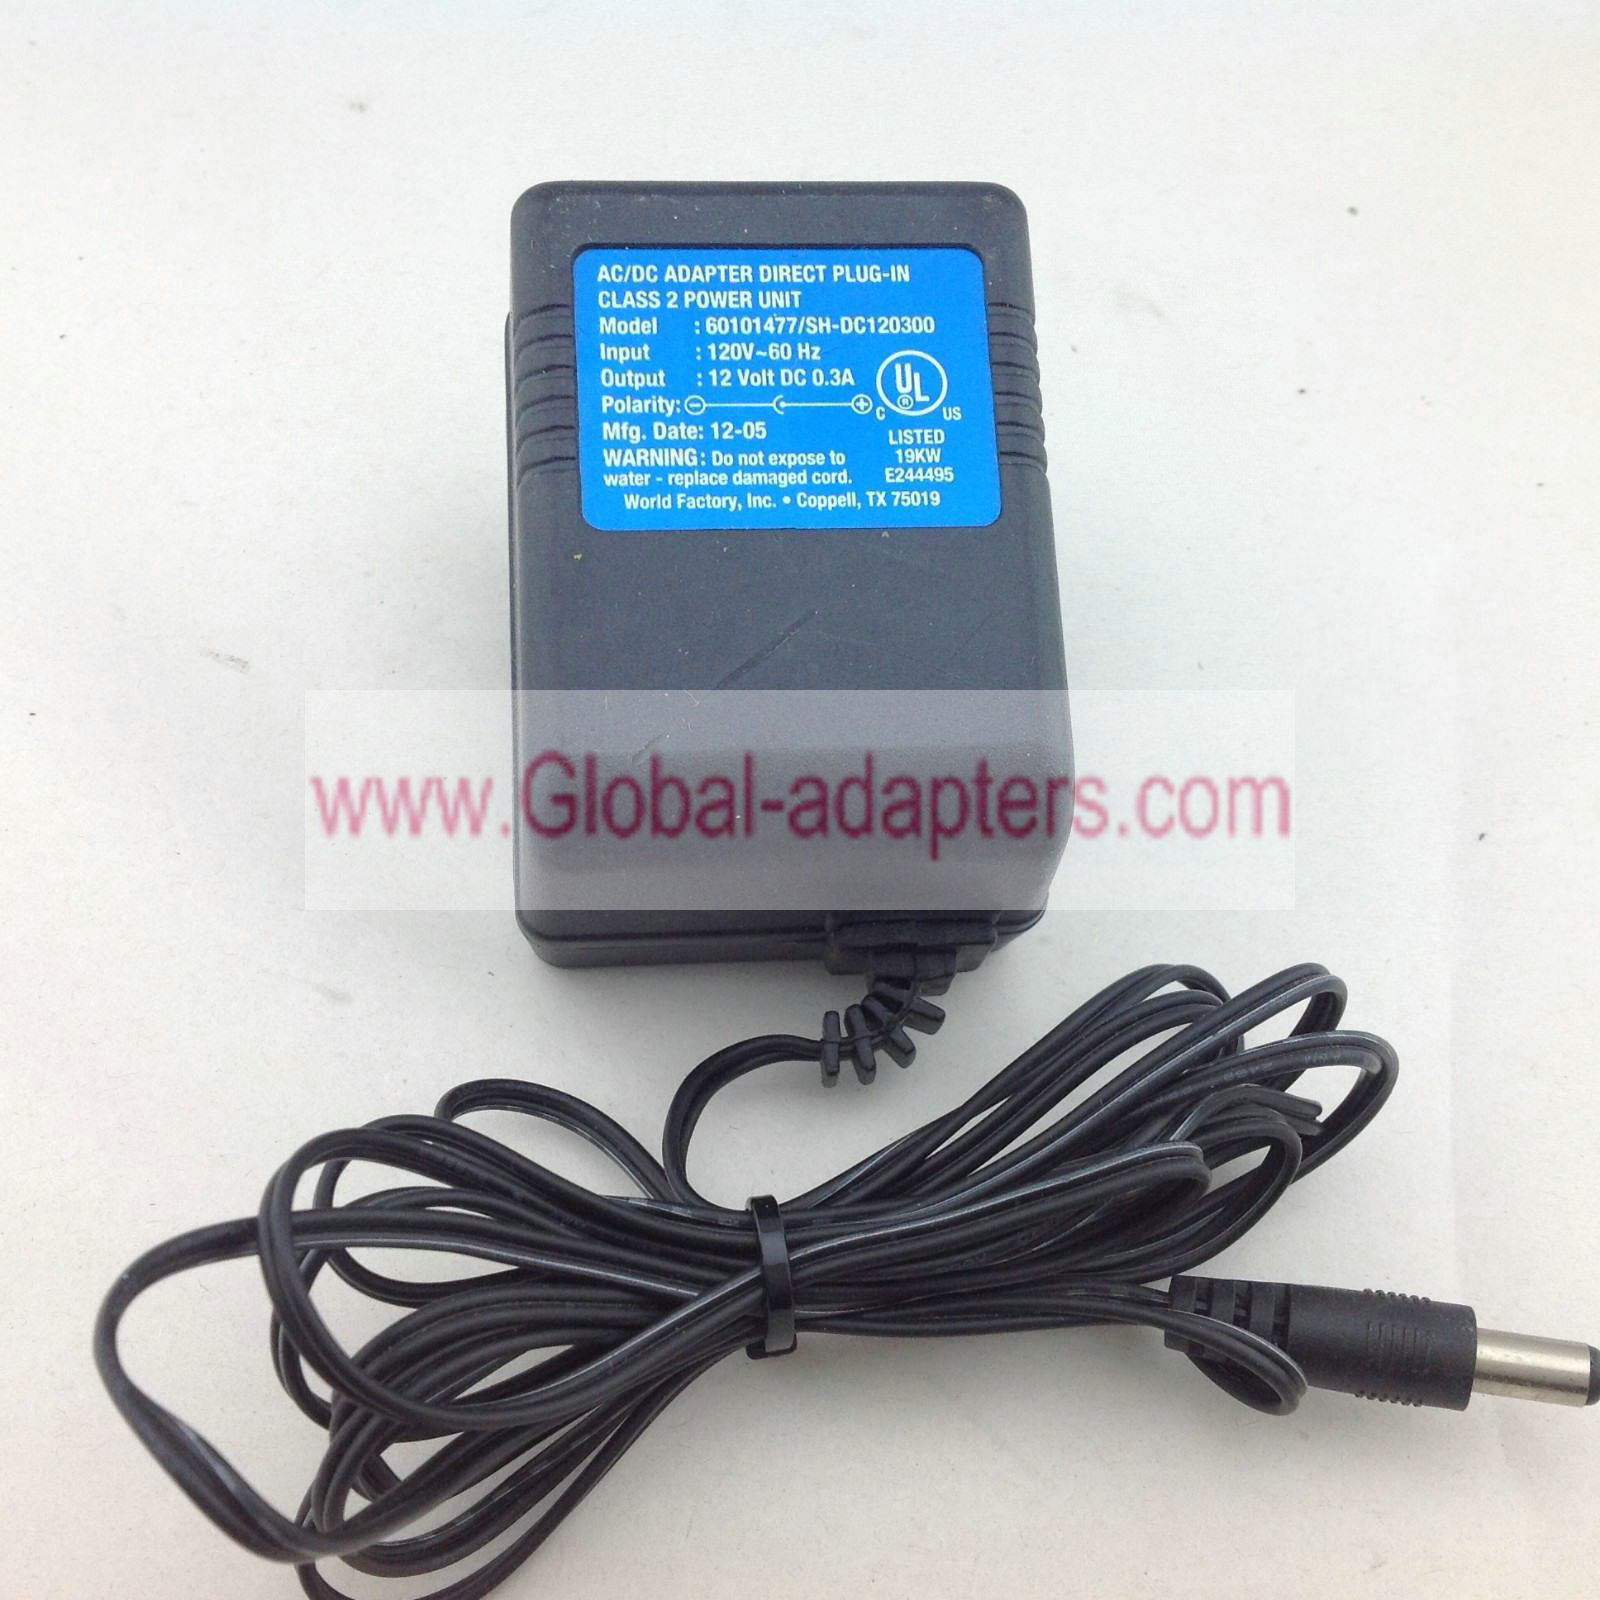 12VDC 0.3A World Factory 60101477 / SH-DC120300 Direct Plug-In AC/DC Adapter